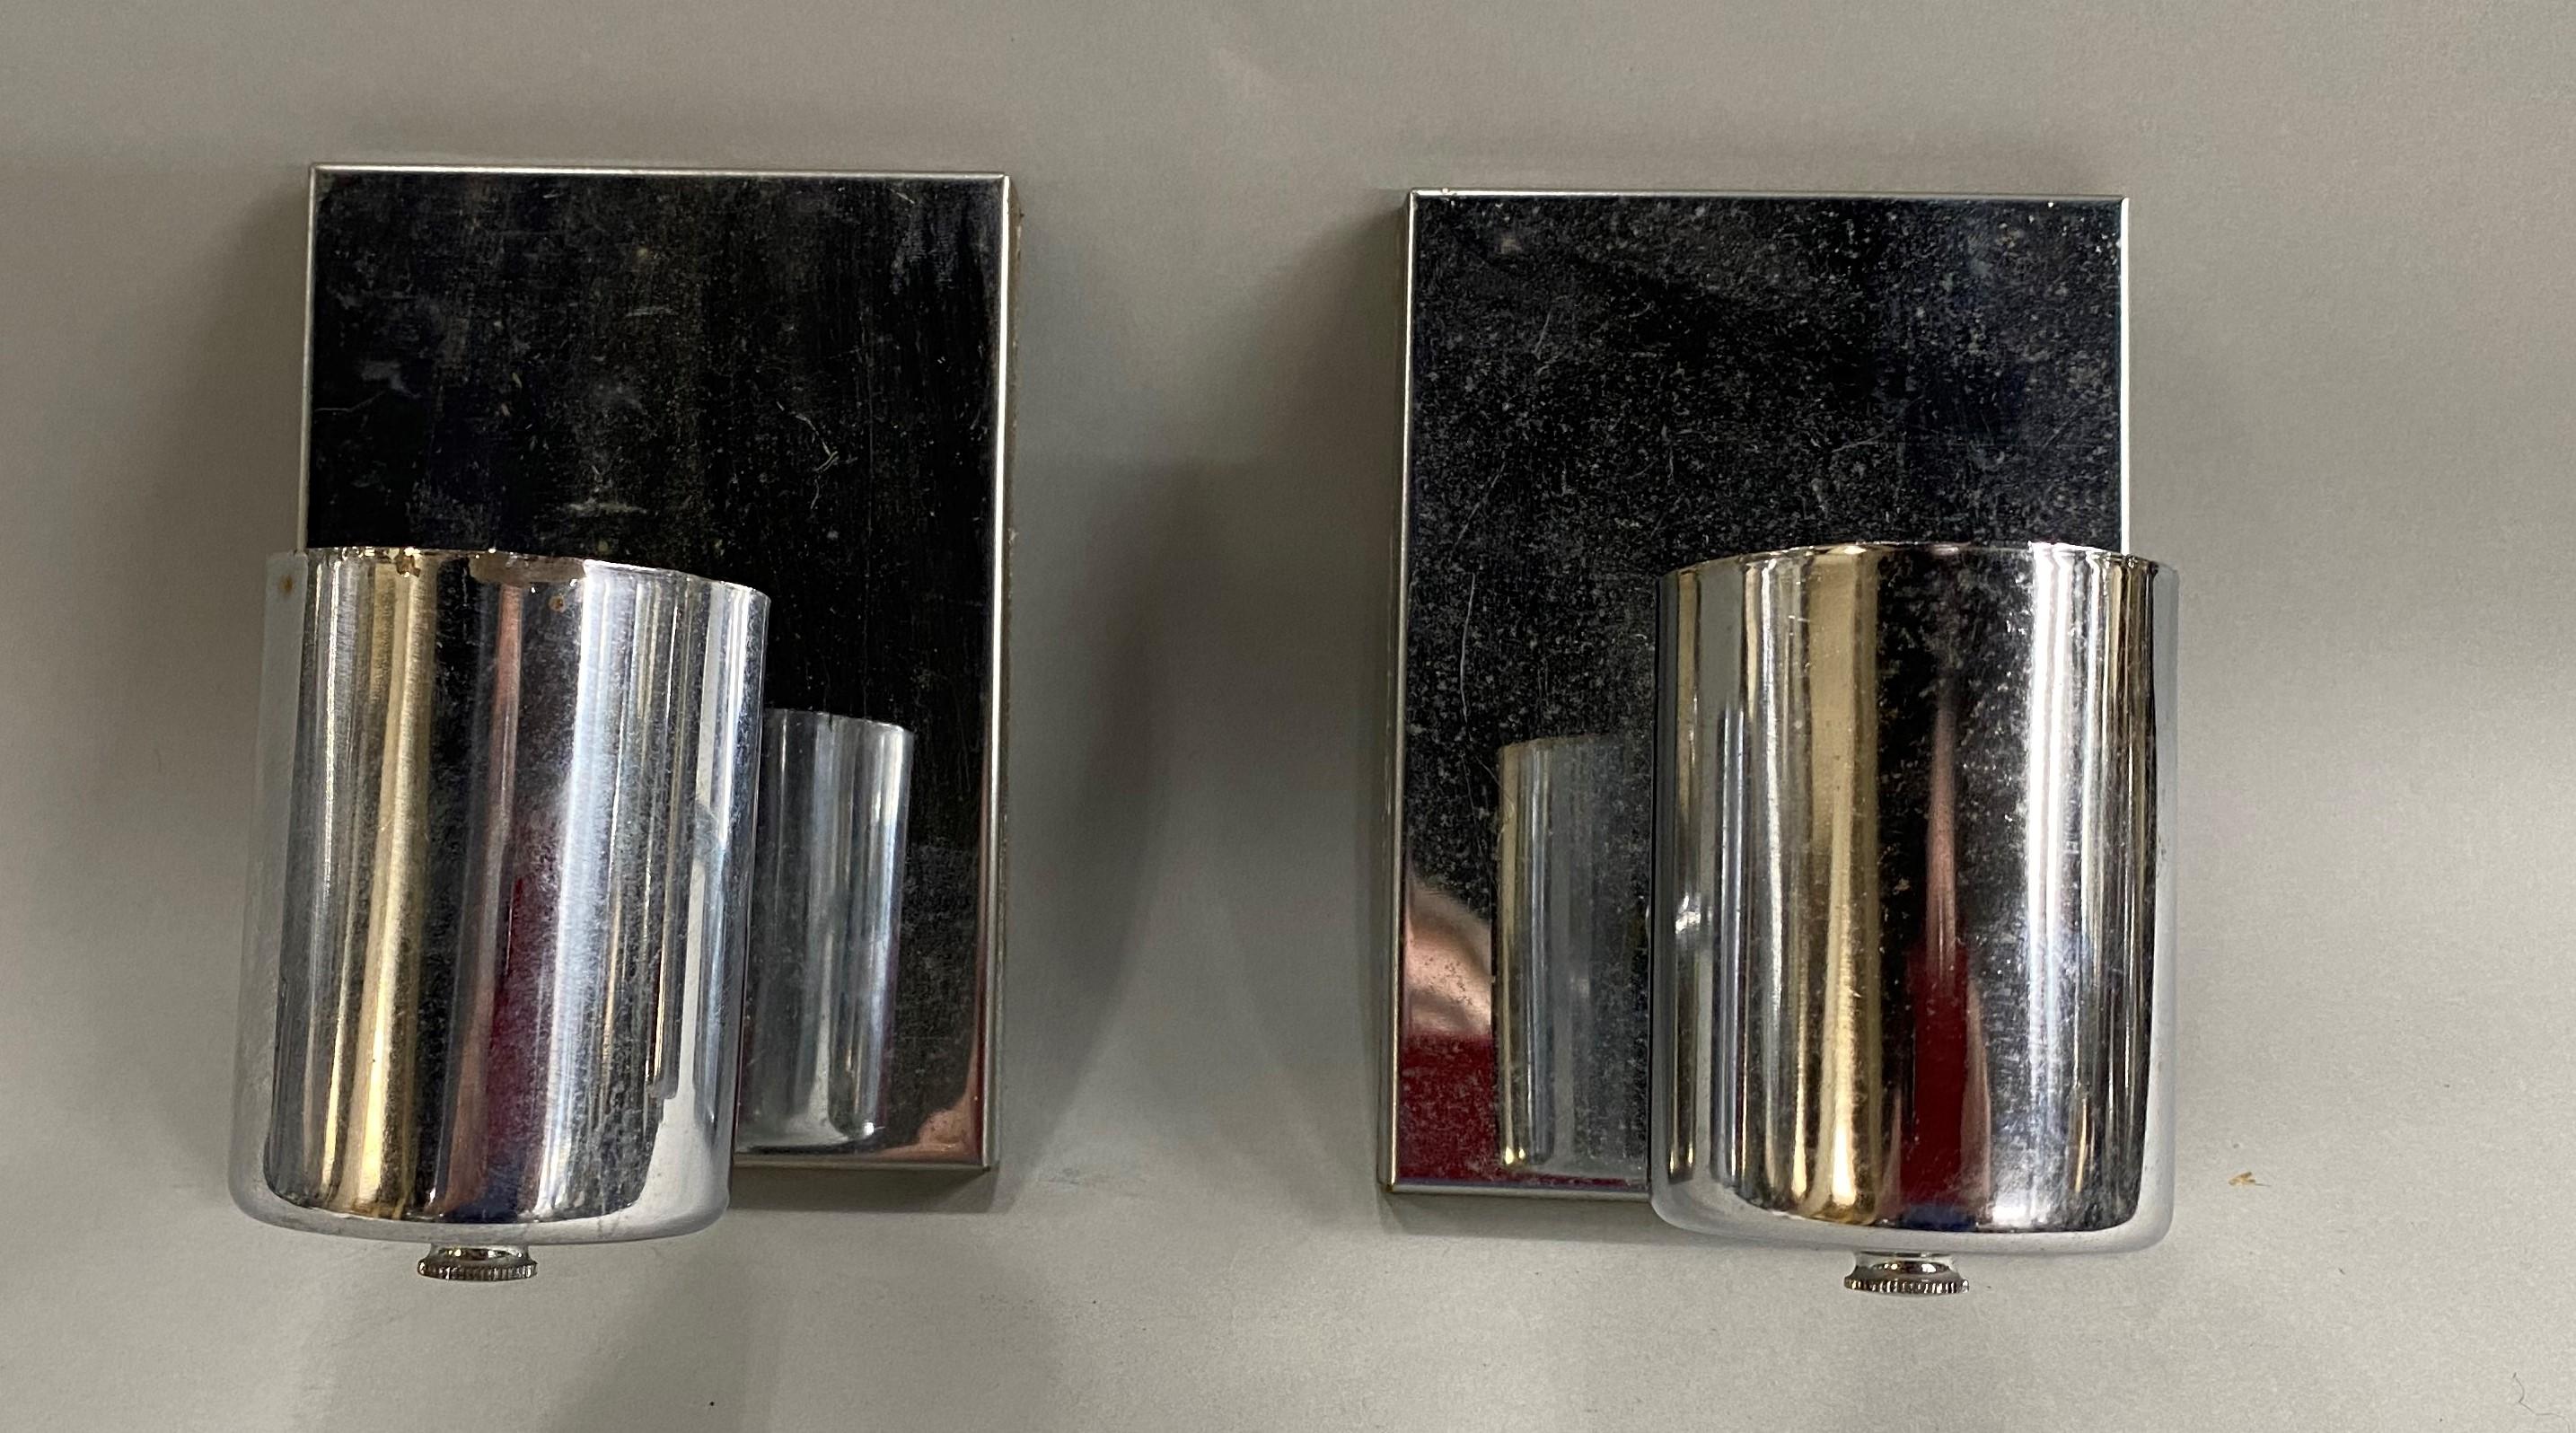 A collection of designer Lite Trend Mid-Century Modern chrome Signal light sconces with vertical rectangular back plates, great for accent or hallway lighting, in good overall condition, with some surface or edge imperfections, losses, light spots